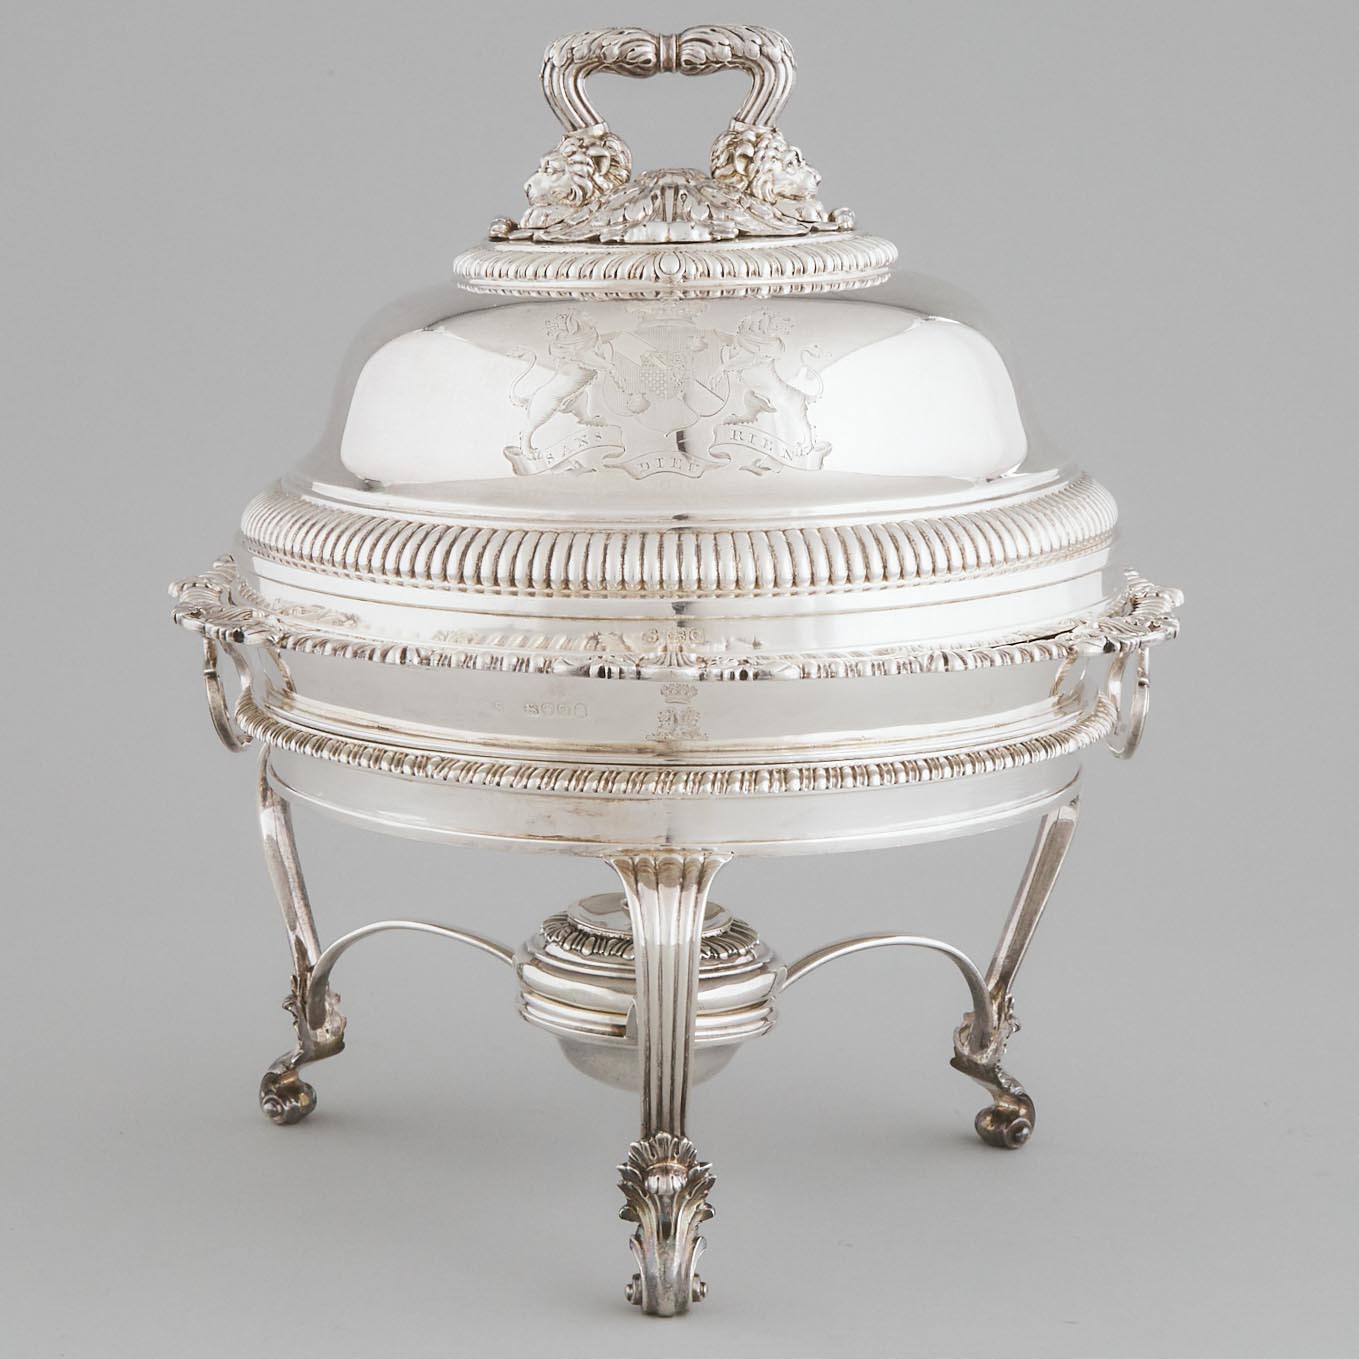 George III Silver Covered Entrée Dish, Paul Storr, London, 1811, and a Warming Stand with Burner, William Stroud, London, 1809